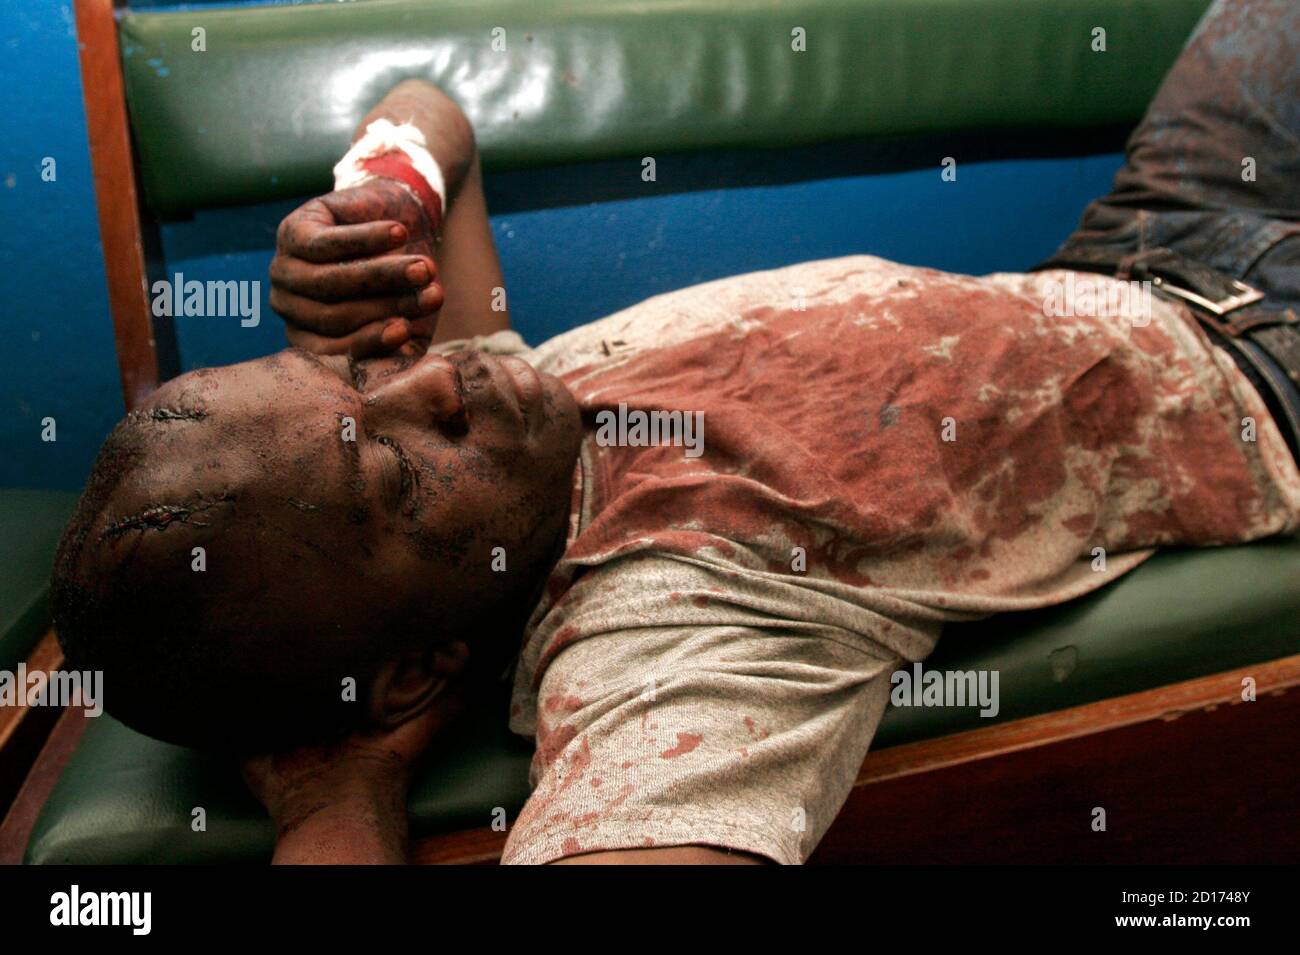 A man wounded during ethnic violence waits for assistance in Nairobi January 2, 2008. President Mwai Kibaki's government accused rival Raila Odinga's party of unleashing 'genocide' in Kenya on Wednesday as the death toll from tribal violence over a disputed election passed 300. REUTERS/Thomas Mukoya   (KENYA) Stock Photo